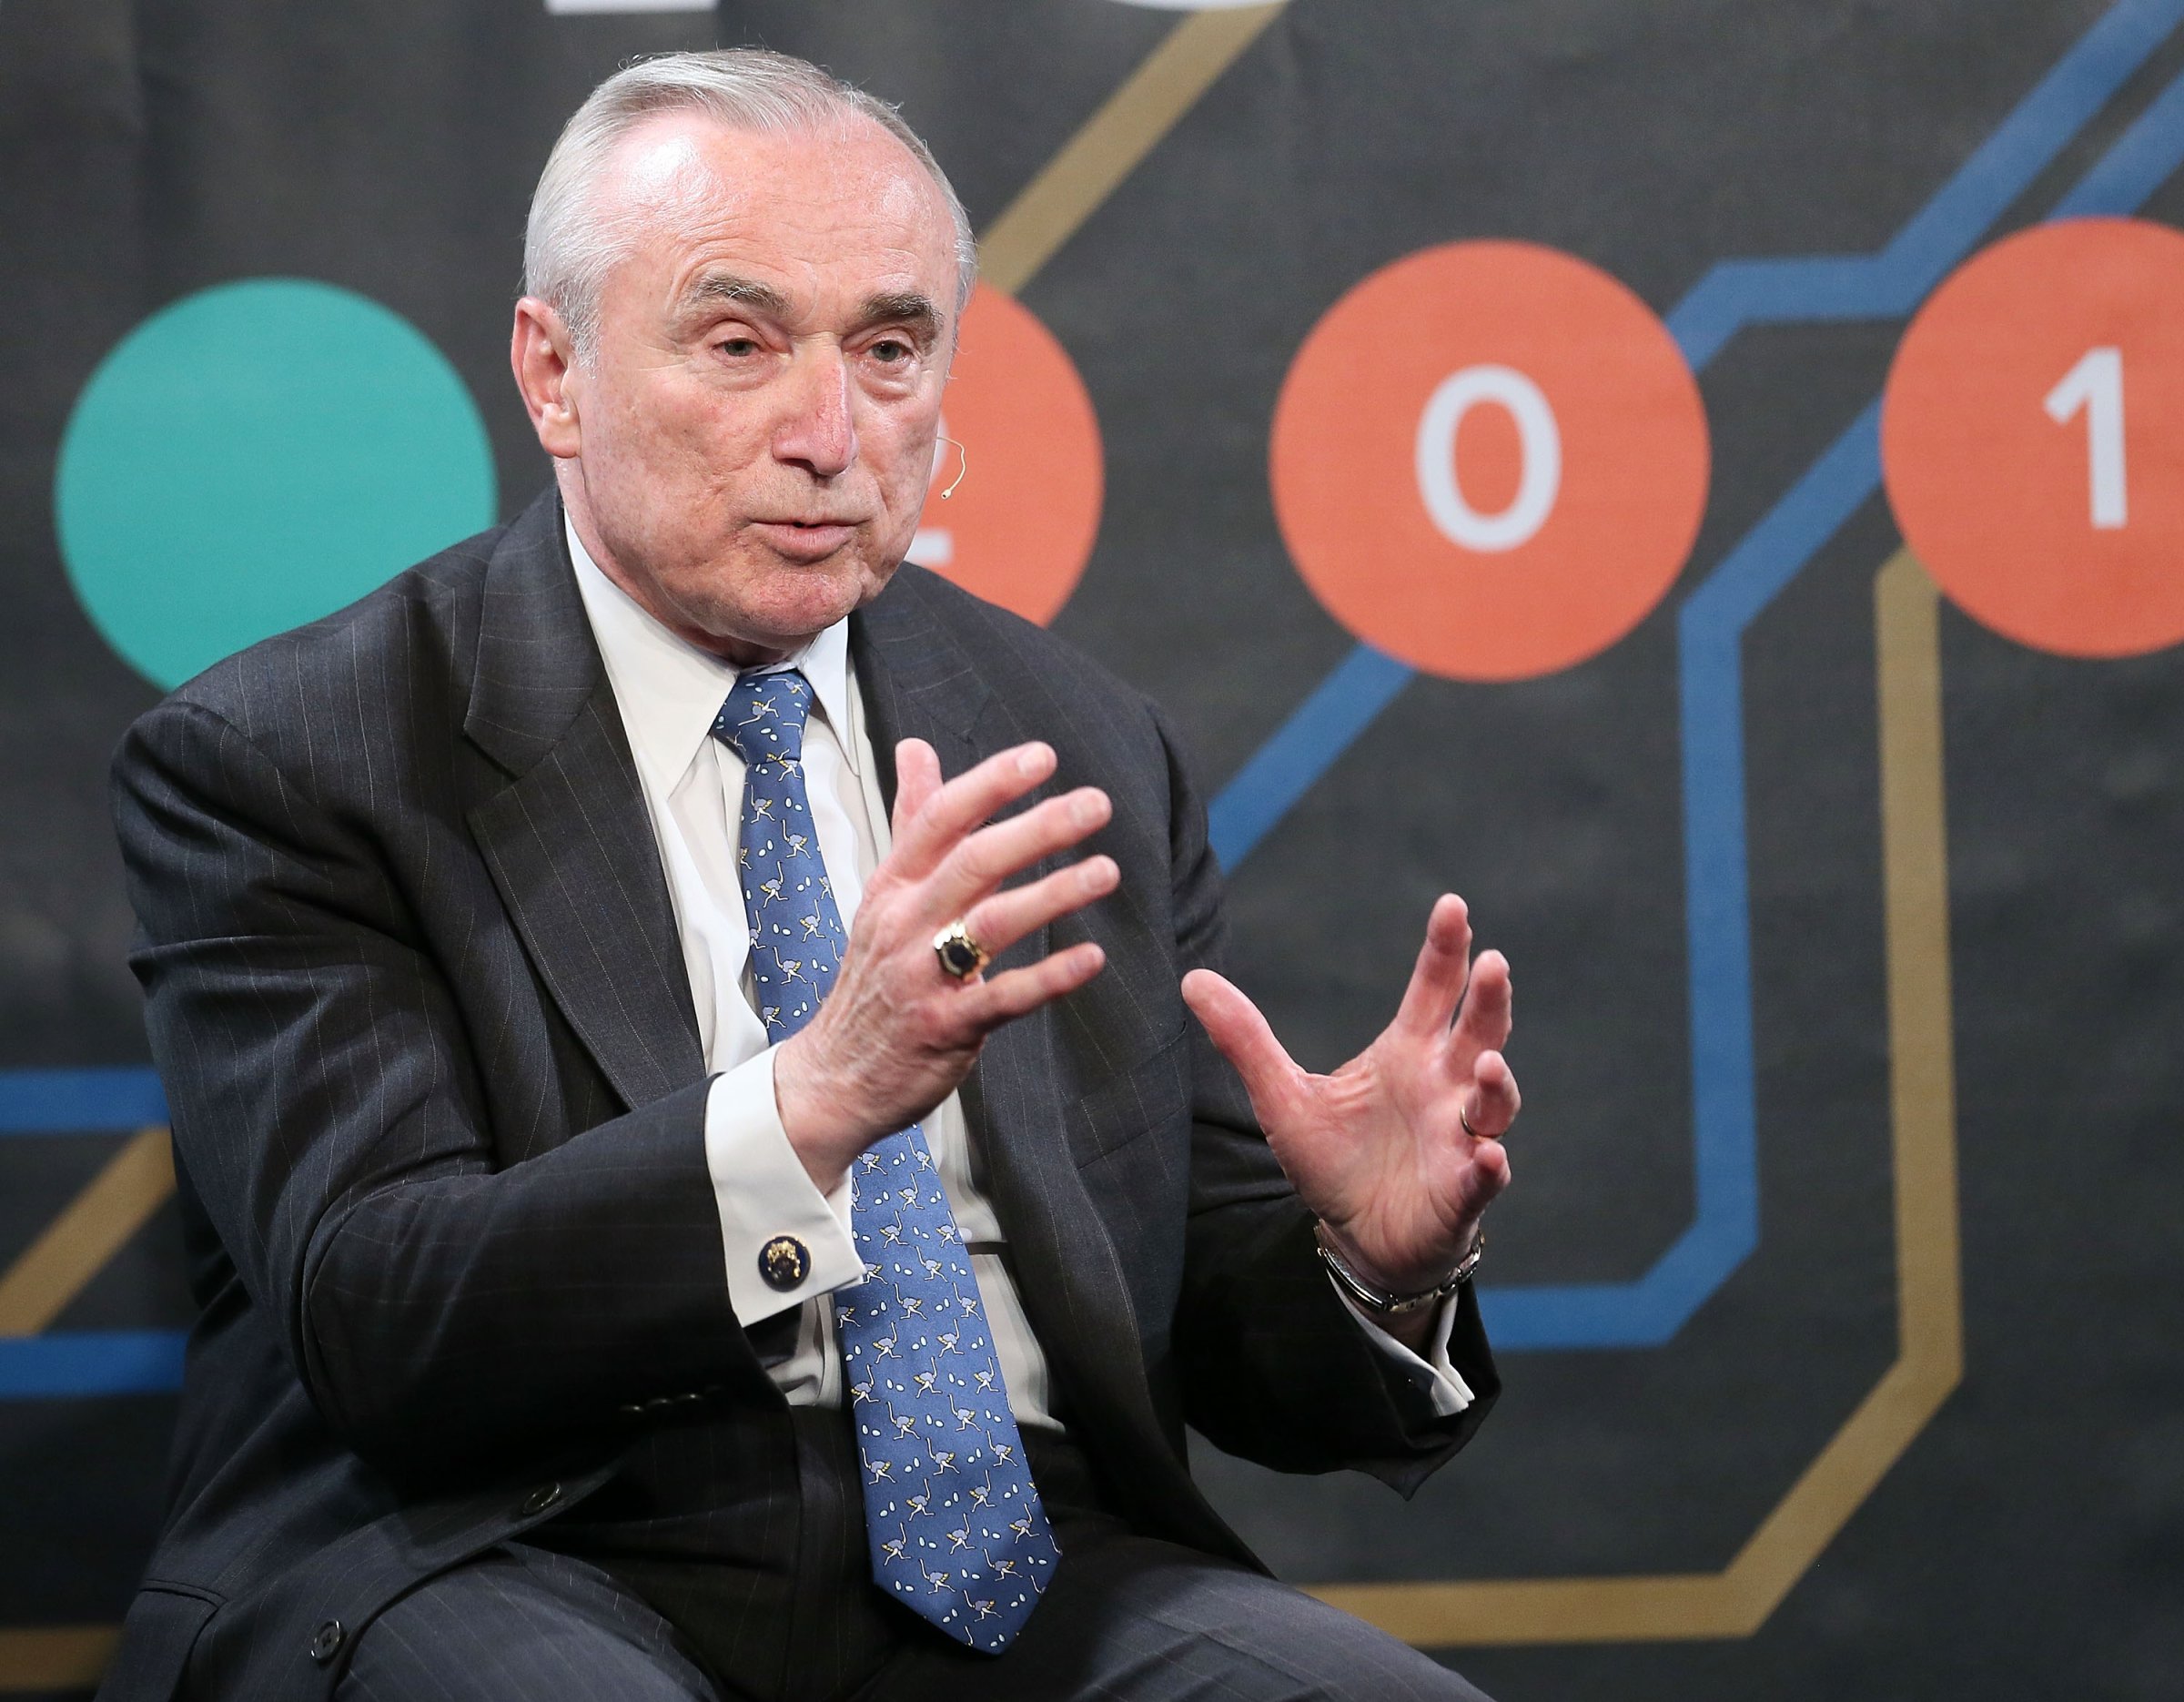 New York City Police Commissioner William Bratton speaks on the 'On Policing in New York - And What Made This Year Different' Panel at the 2015 New York Ideas Forum in New York City on May 20, 2015.